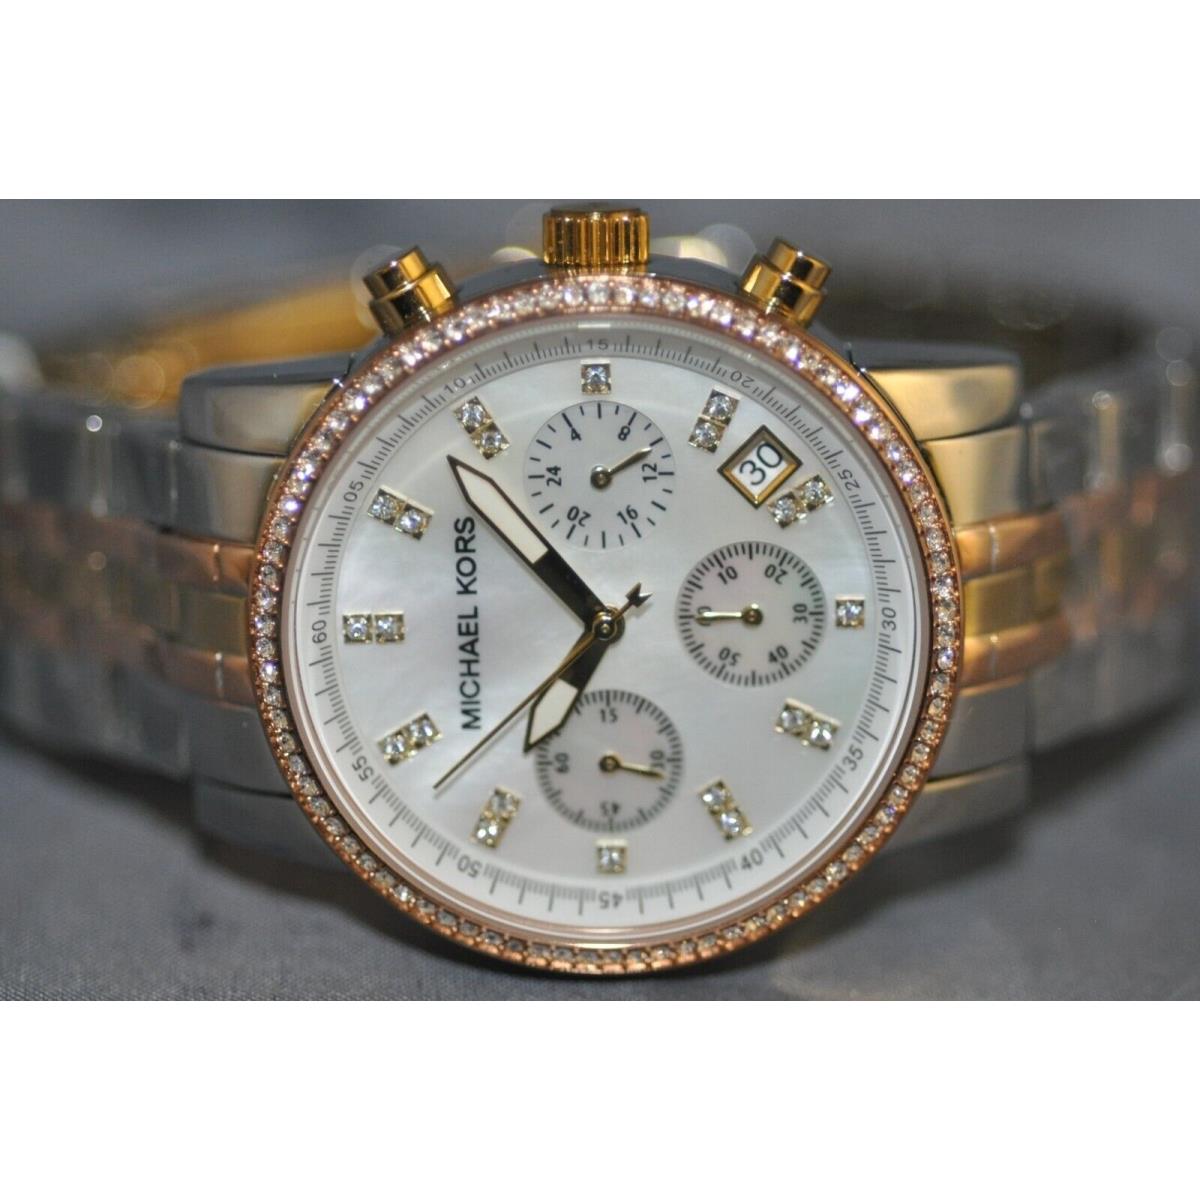 Michael Kors Ladies Ritz Chrono Silver Mop Dial Tri-color Steel Watch MK5650 - Dial: Silver, Band: Gold, Bezel: Rose Gold